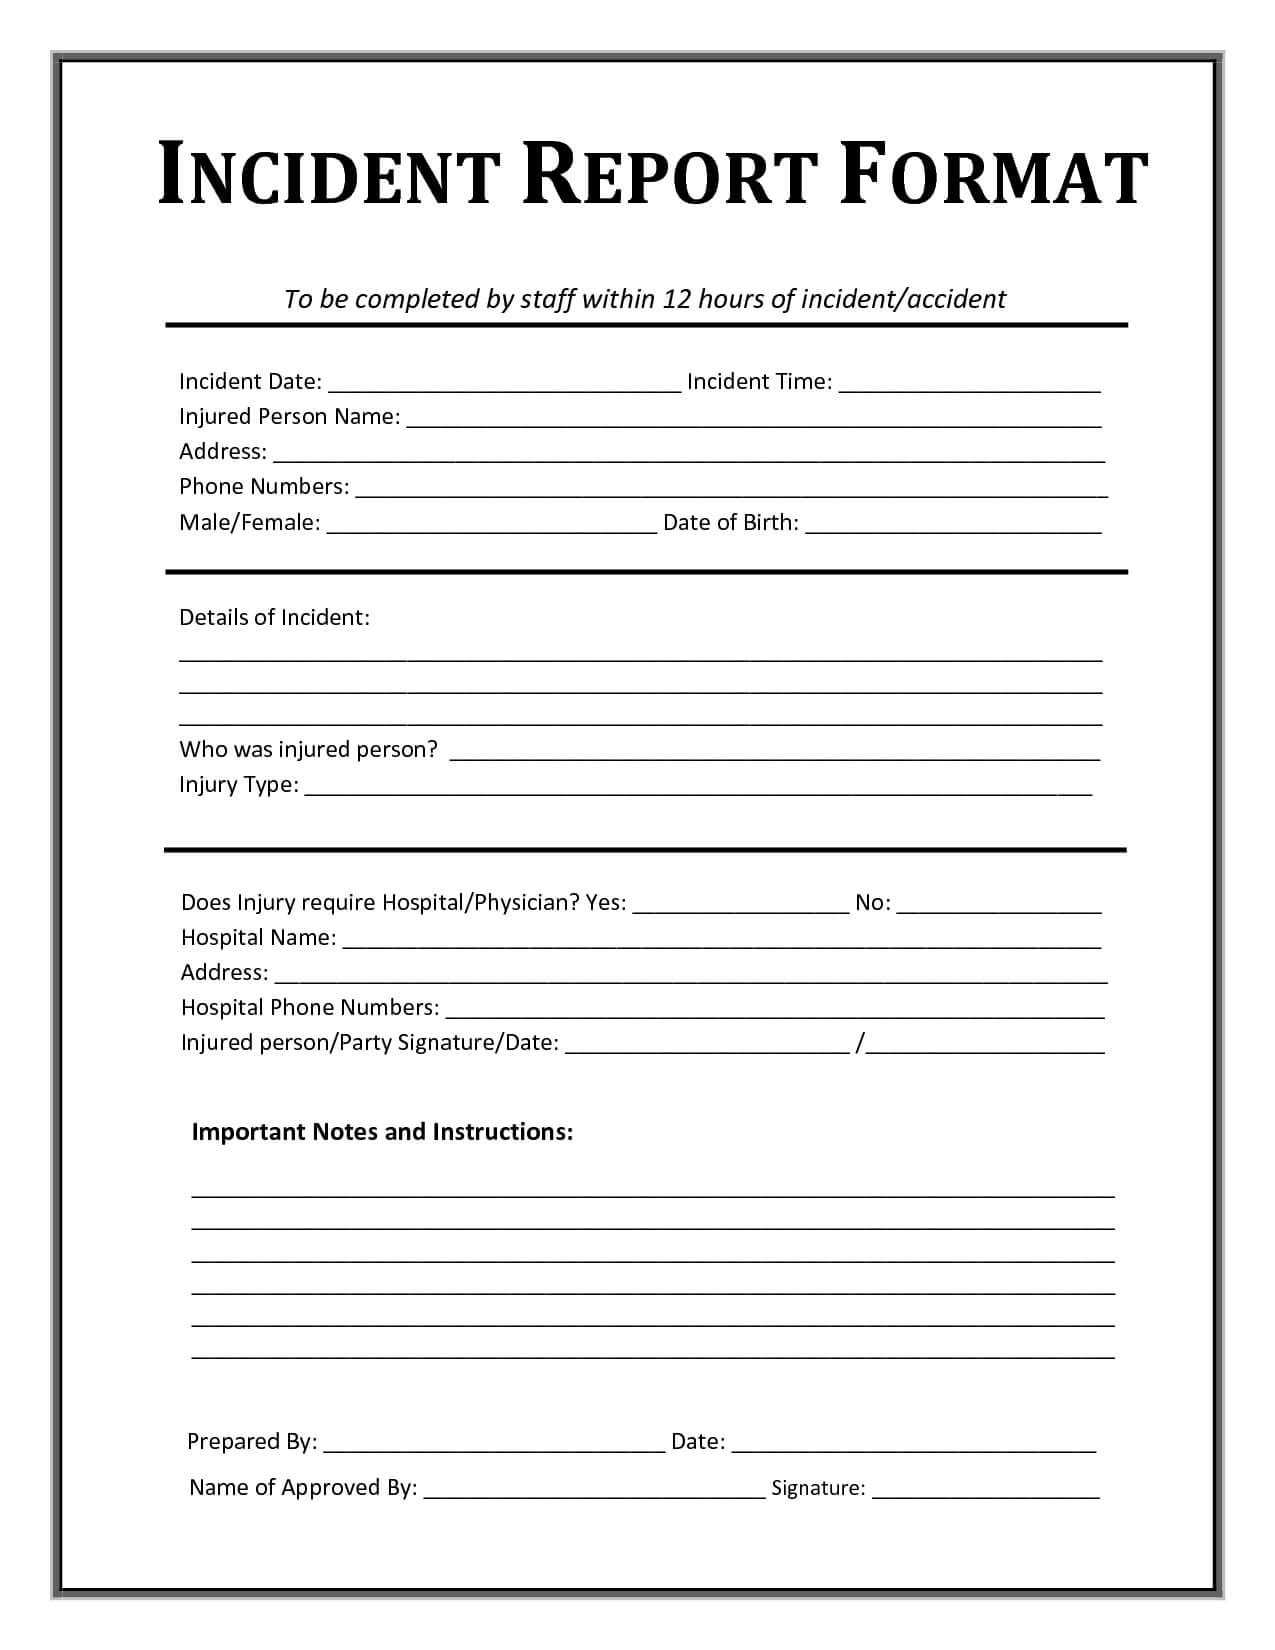 Incident Report Form Template Microsoft Excel | Report Regarding Incident Report Log Template